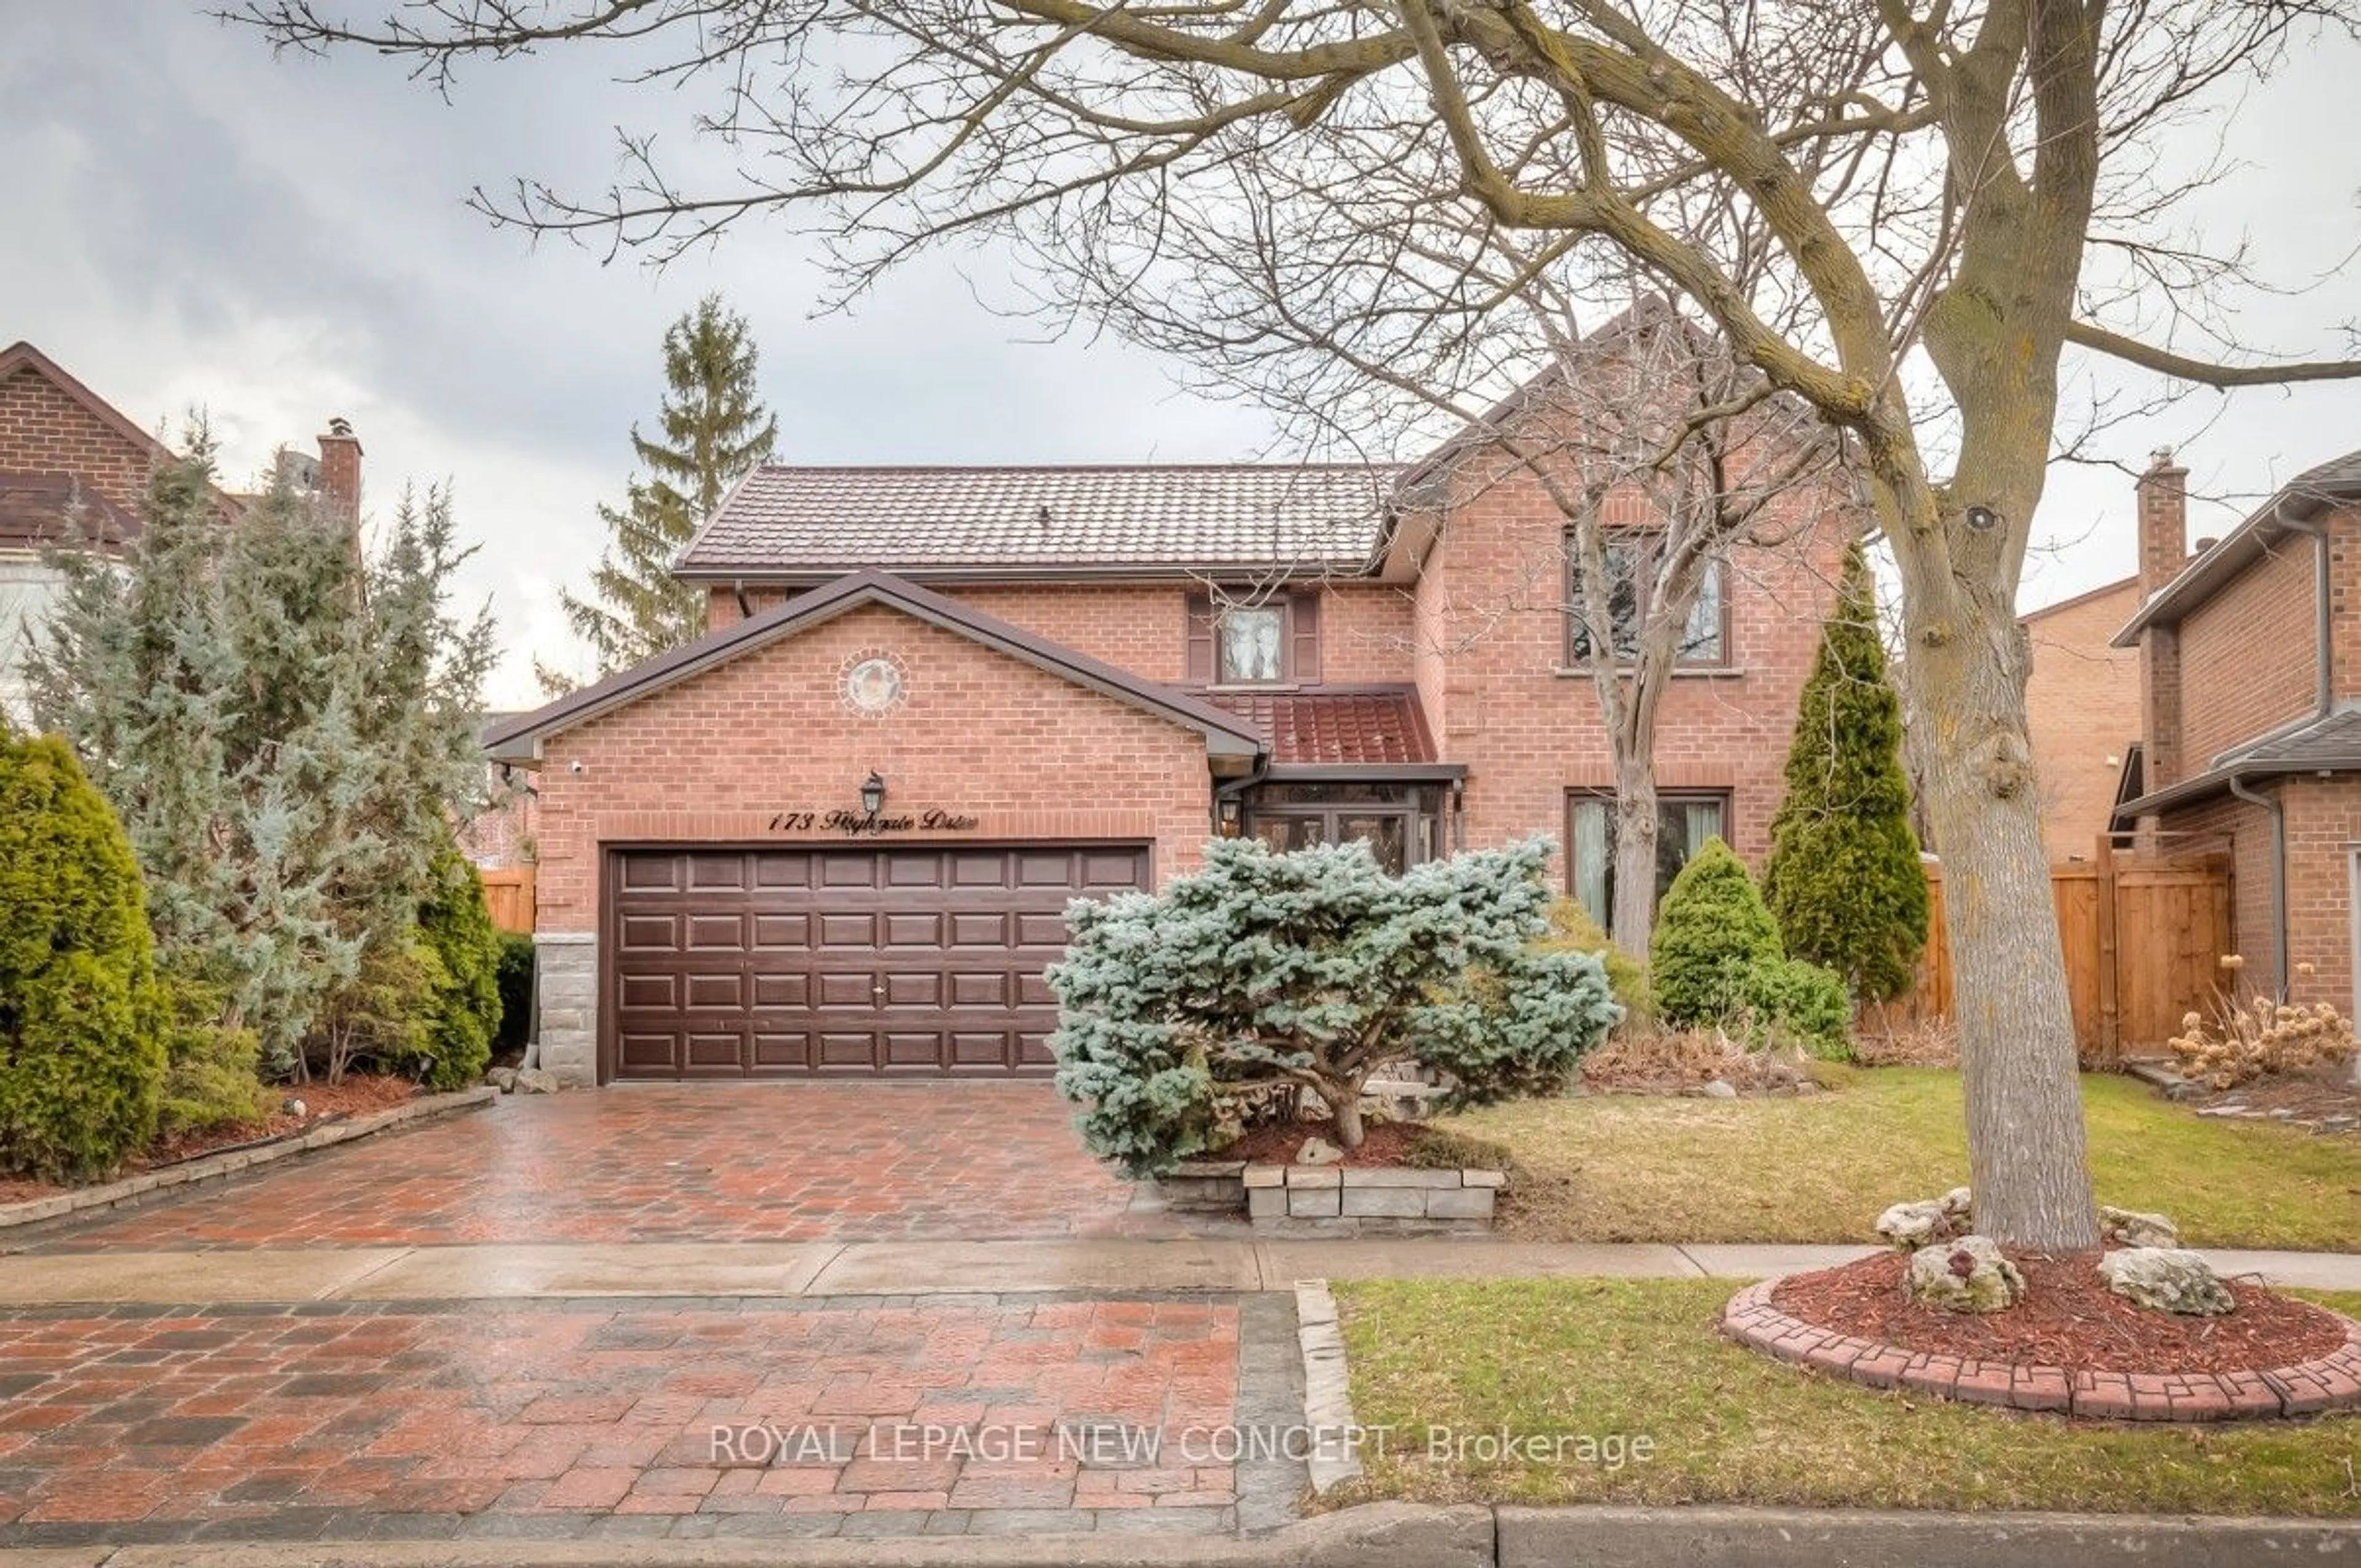 Home with brick exterior material for 173 Highgate Dr, Markham Ontario L3R 4N1